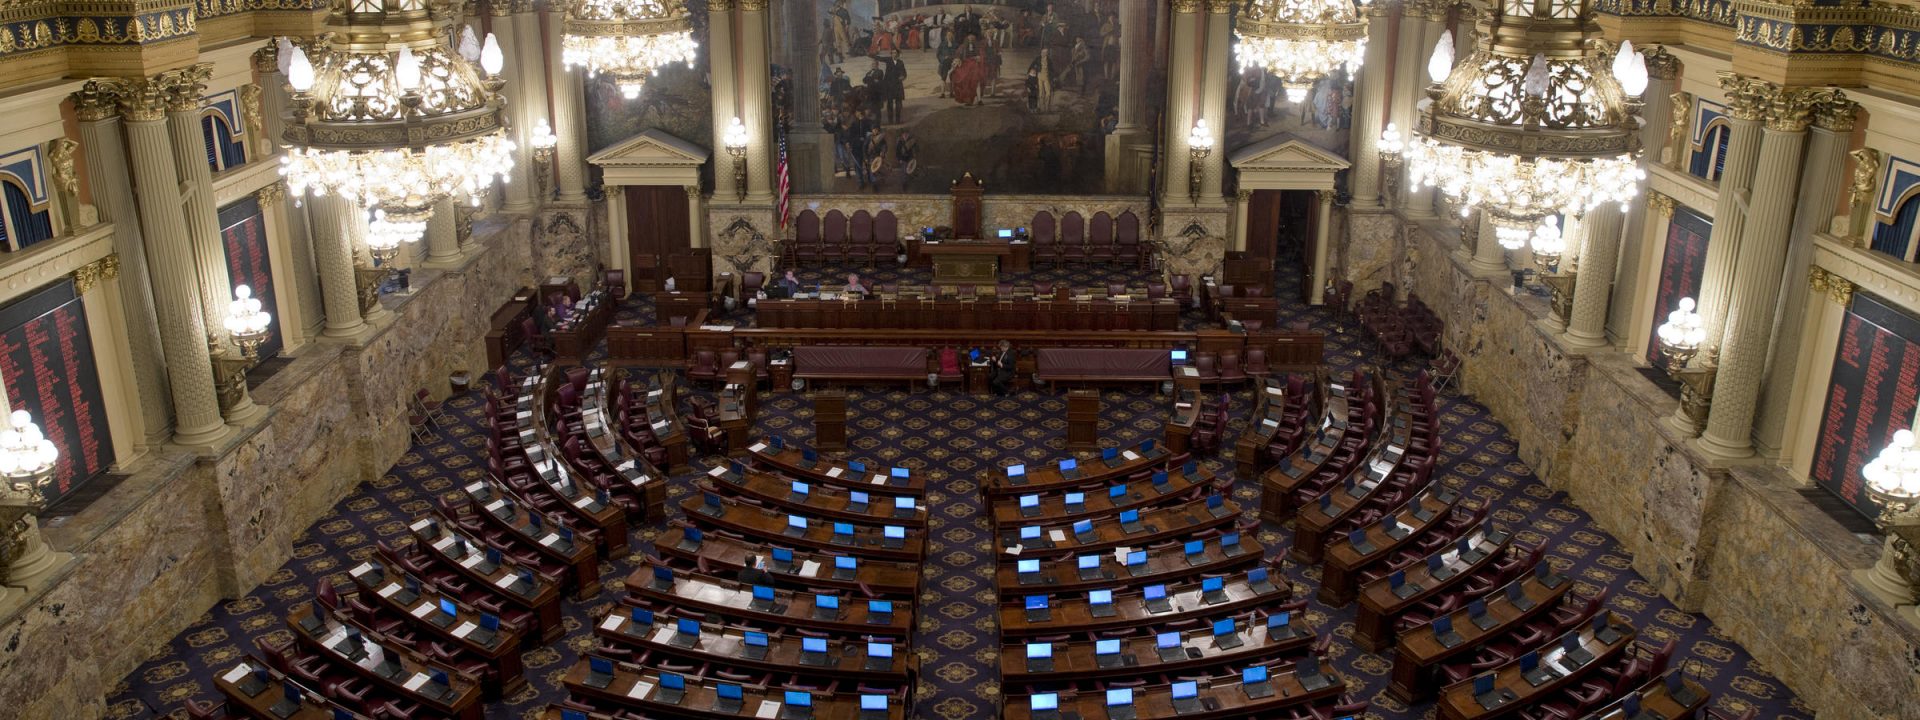 Shown is the Pennsylvania House of Representatives chamber Tuesday, Dec. 8, 2015, in Harrisburg, Pa.